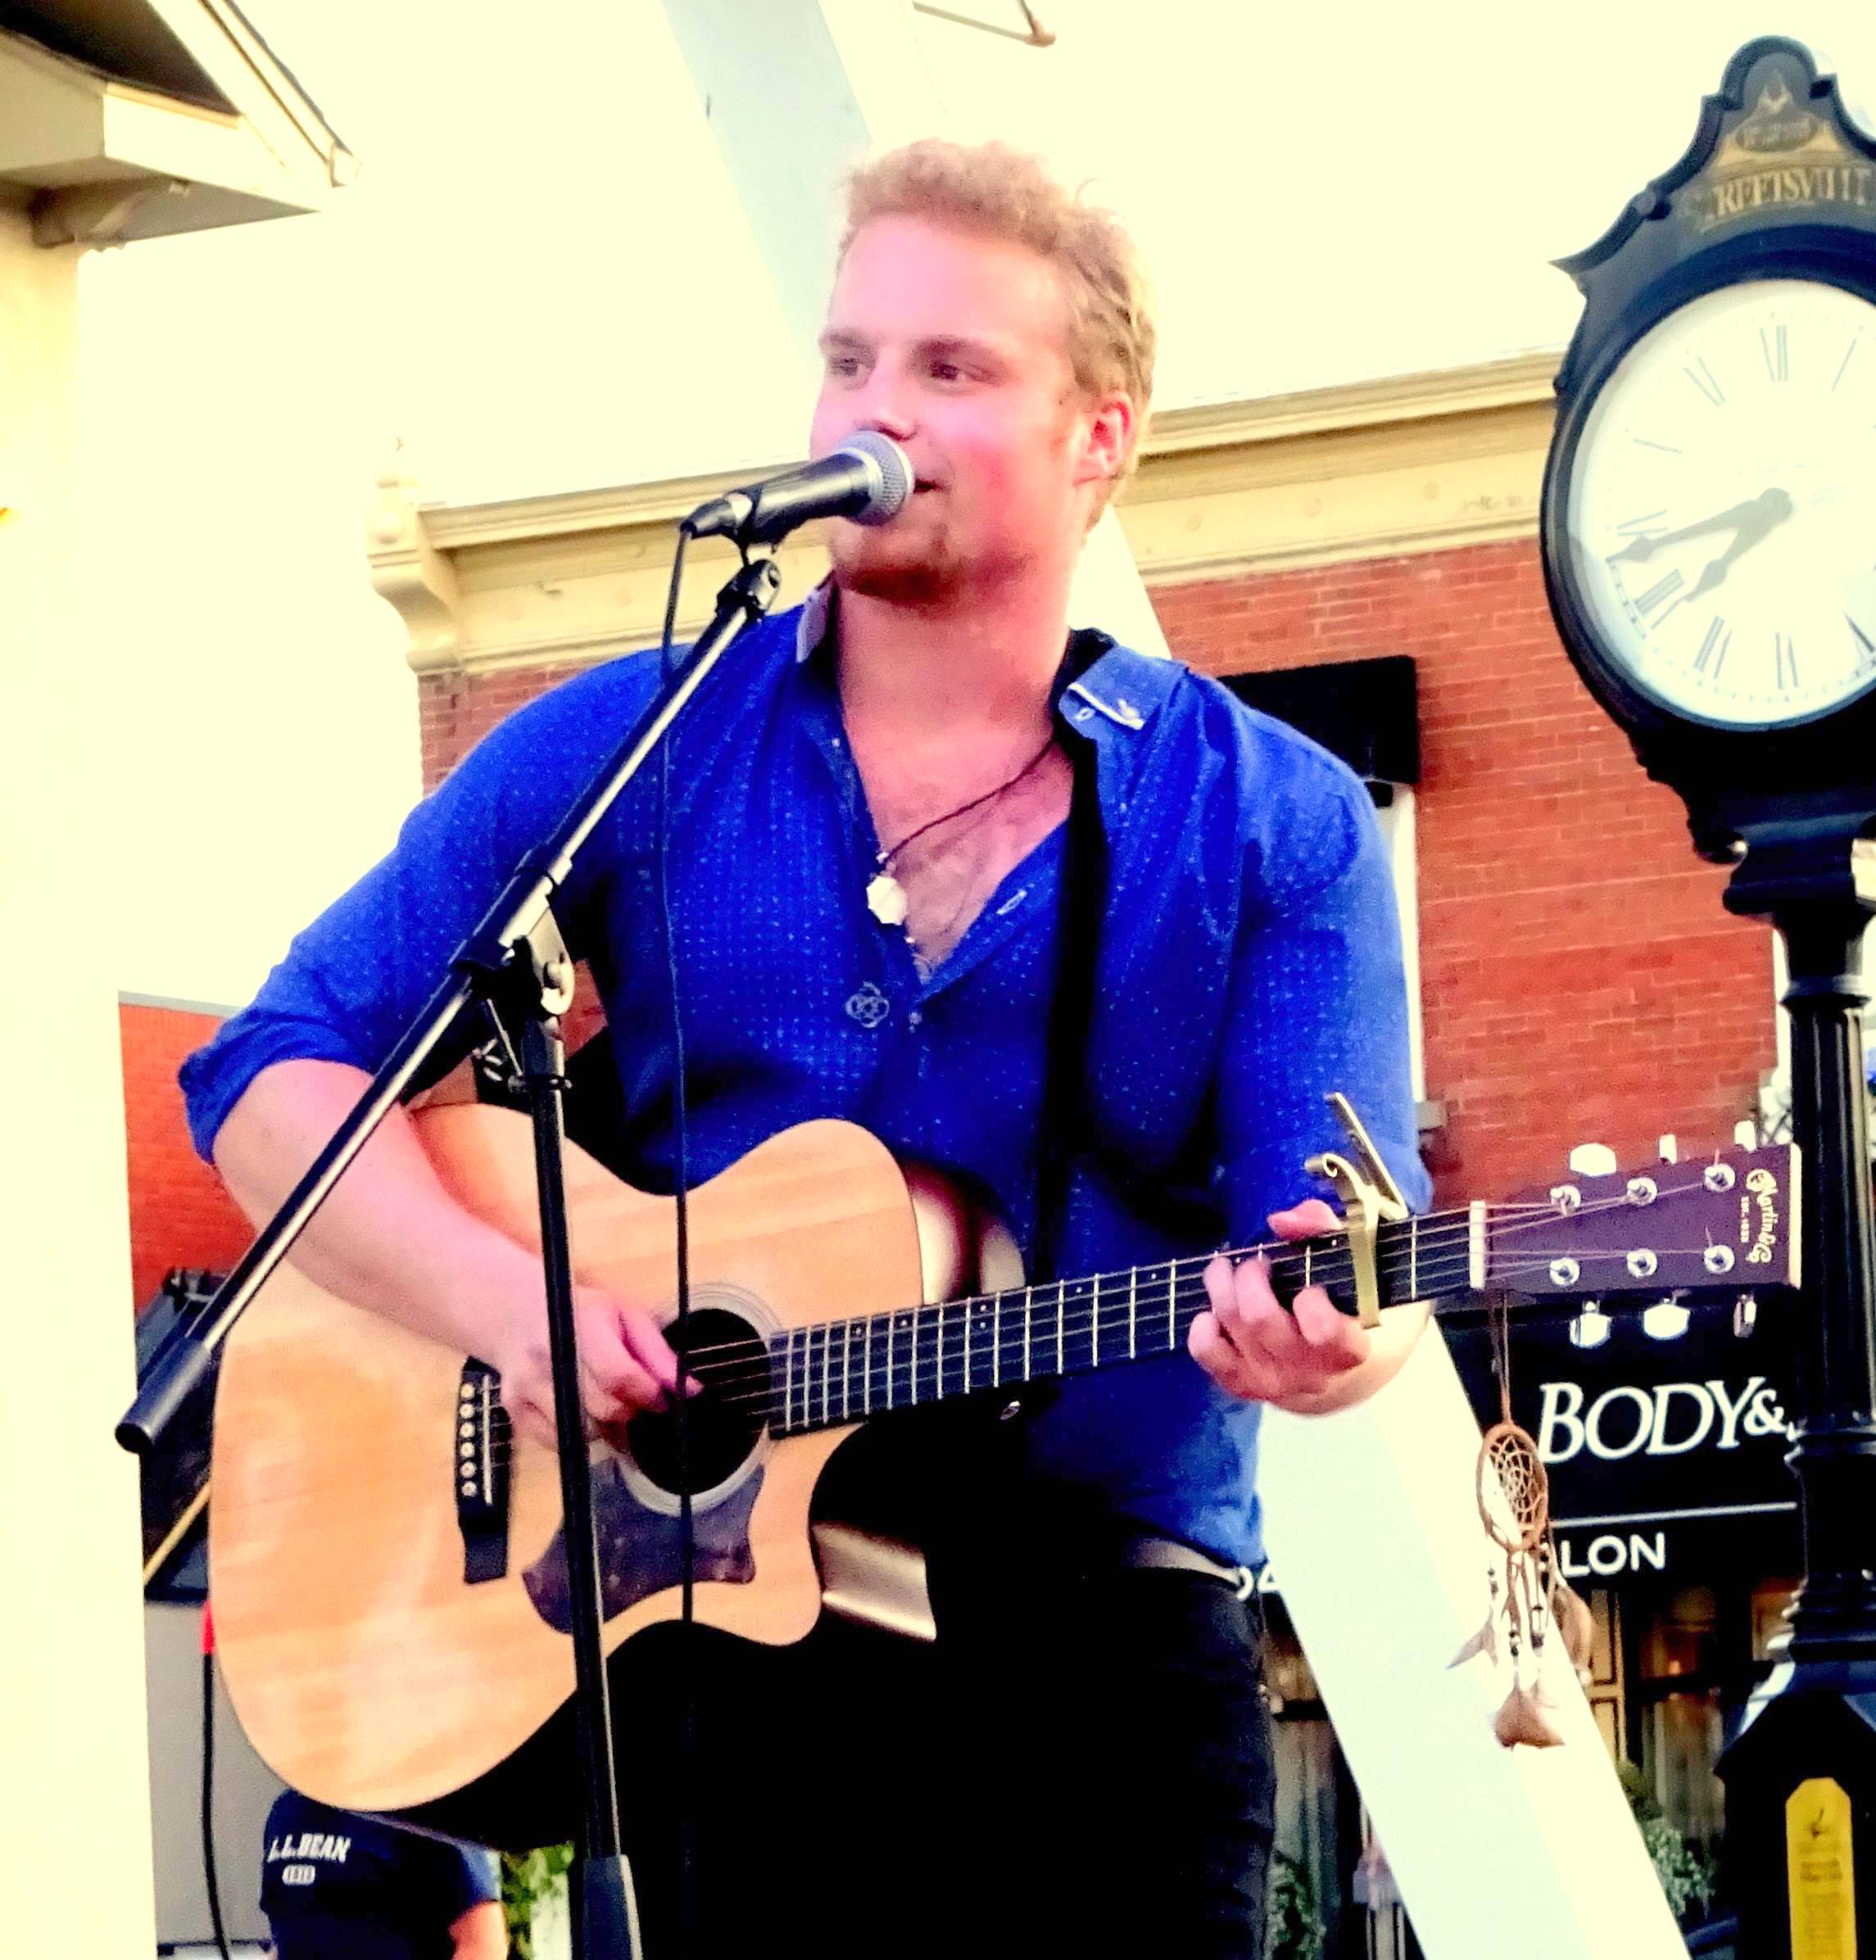 Blues Musician Jacob Bihum performs at Streetsville Village Square 23 Aug 2019. Photo by I Lee.